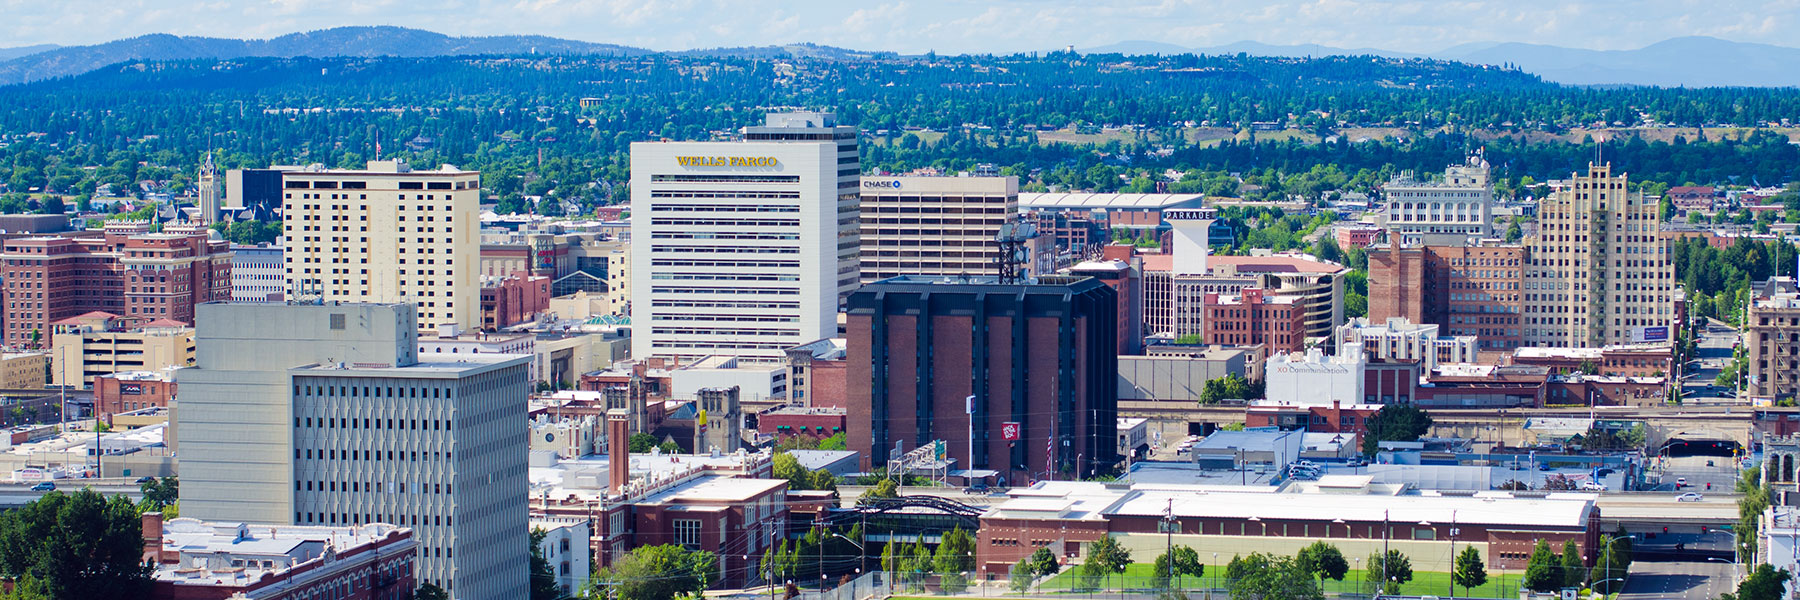 A wide view of the downtown Spokane skyline during the day.